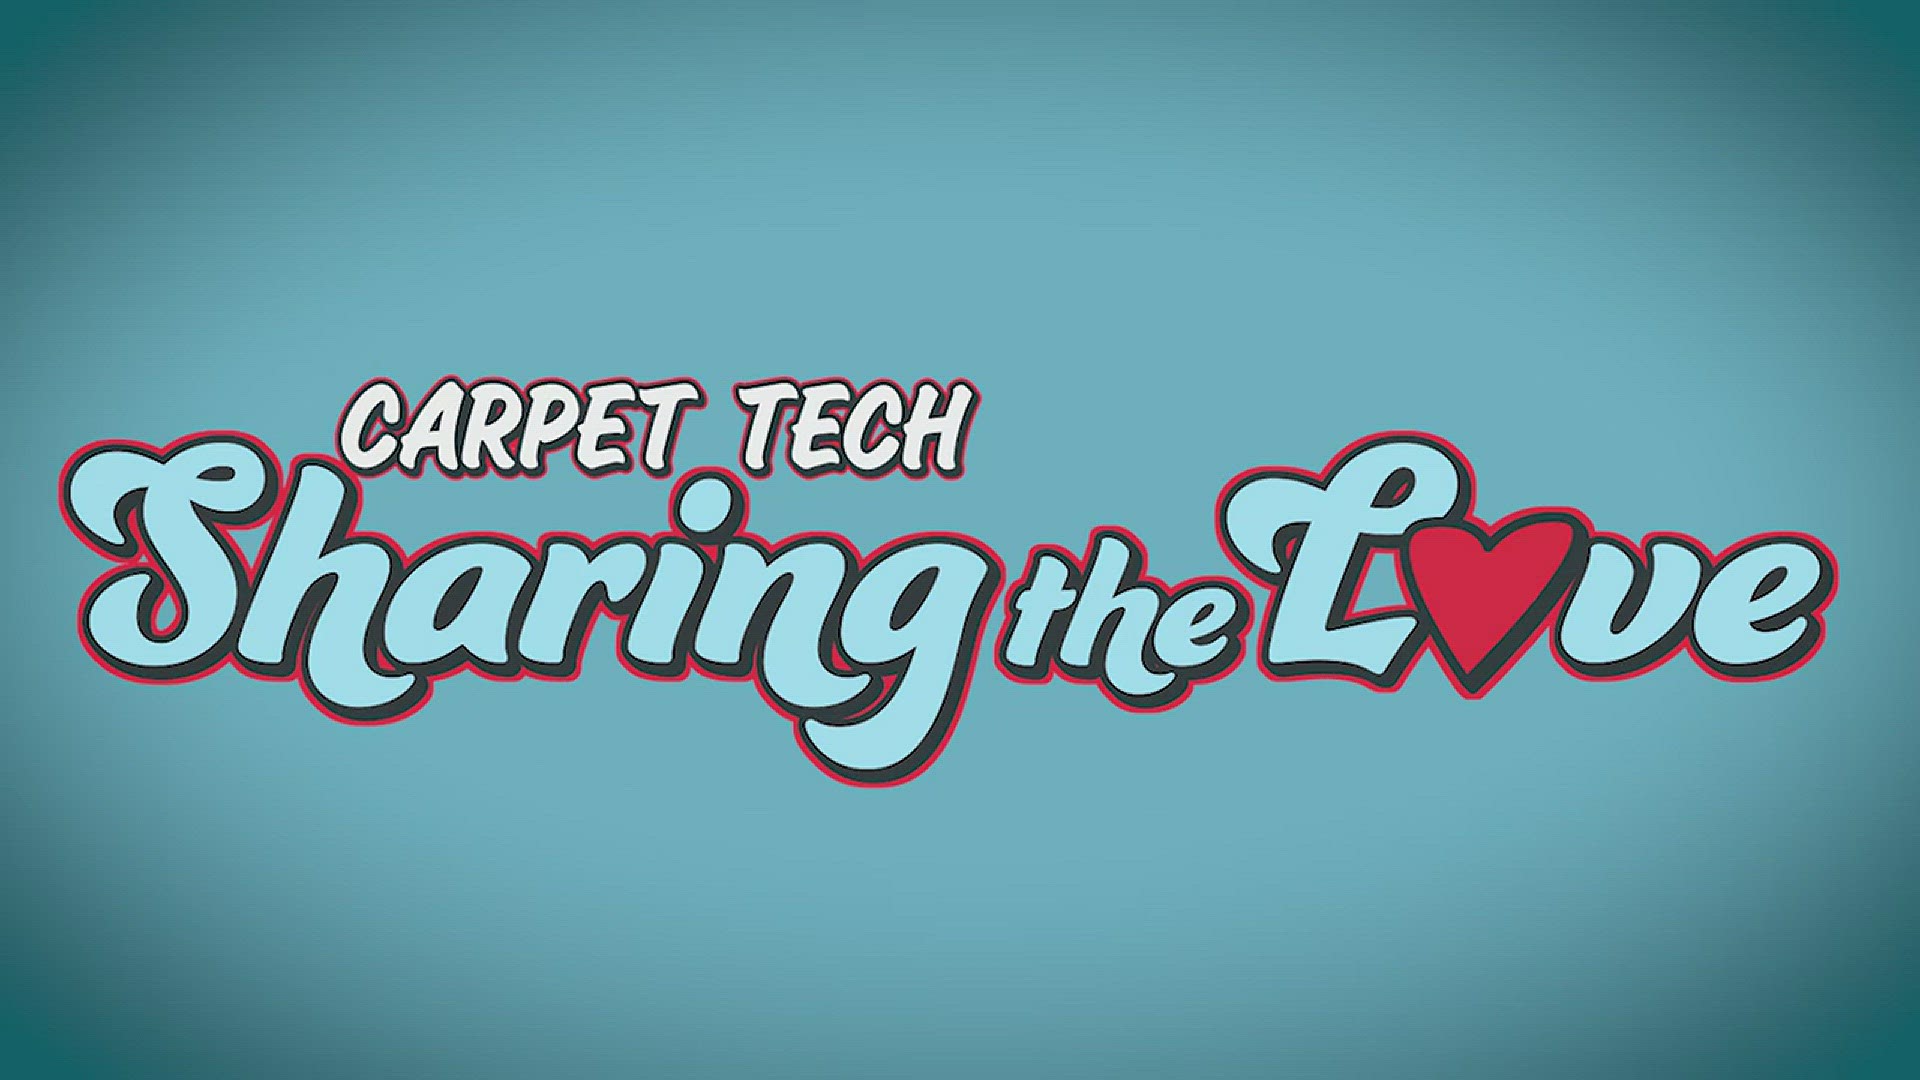 Carpet Tech is sharing the love with Midland Humane Coalition.